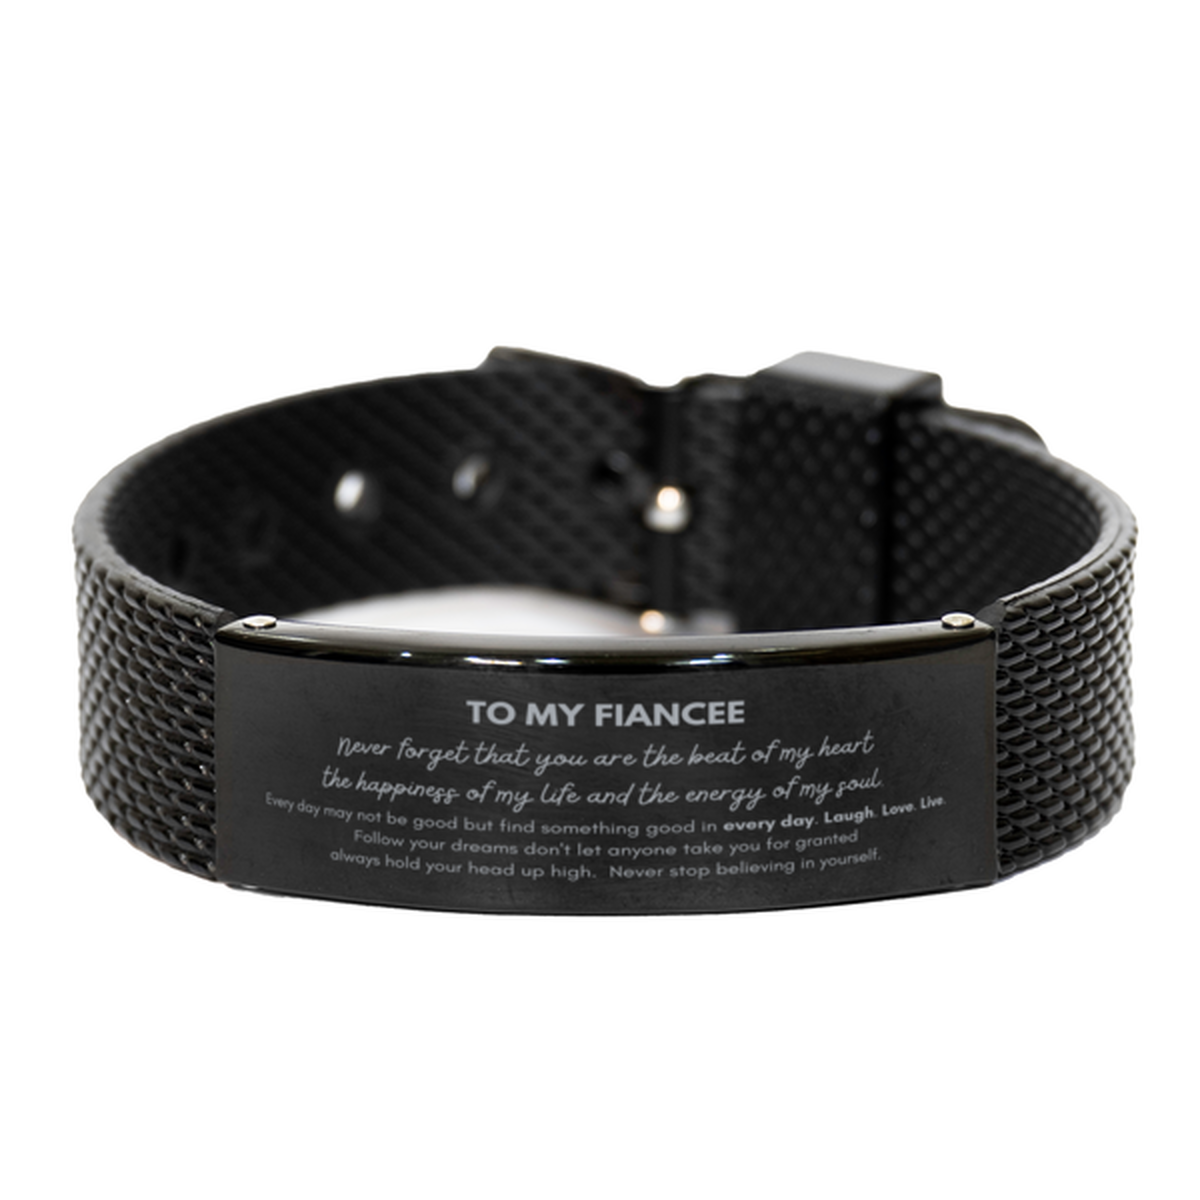 To My Fiancee Bracelet Gifts, Christmas Fiancee Black Shark Mesh Bracelet Present, Birthday Unique Motivational For Fiancee, To My Fiancee Never forget that you are the beat of my heart the happiness of my life and the energy of my soul